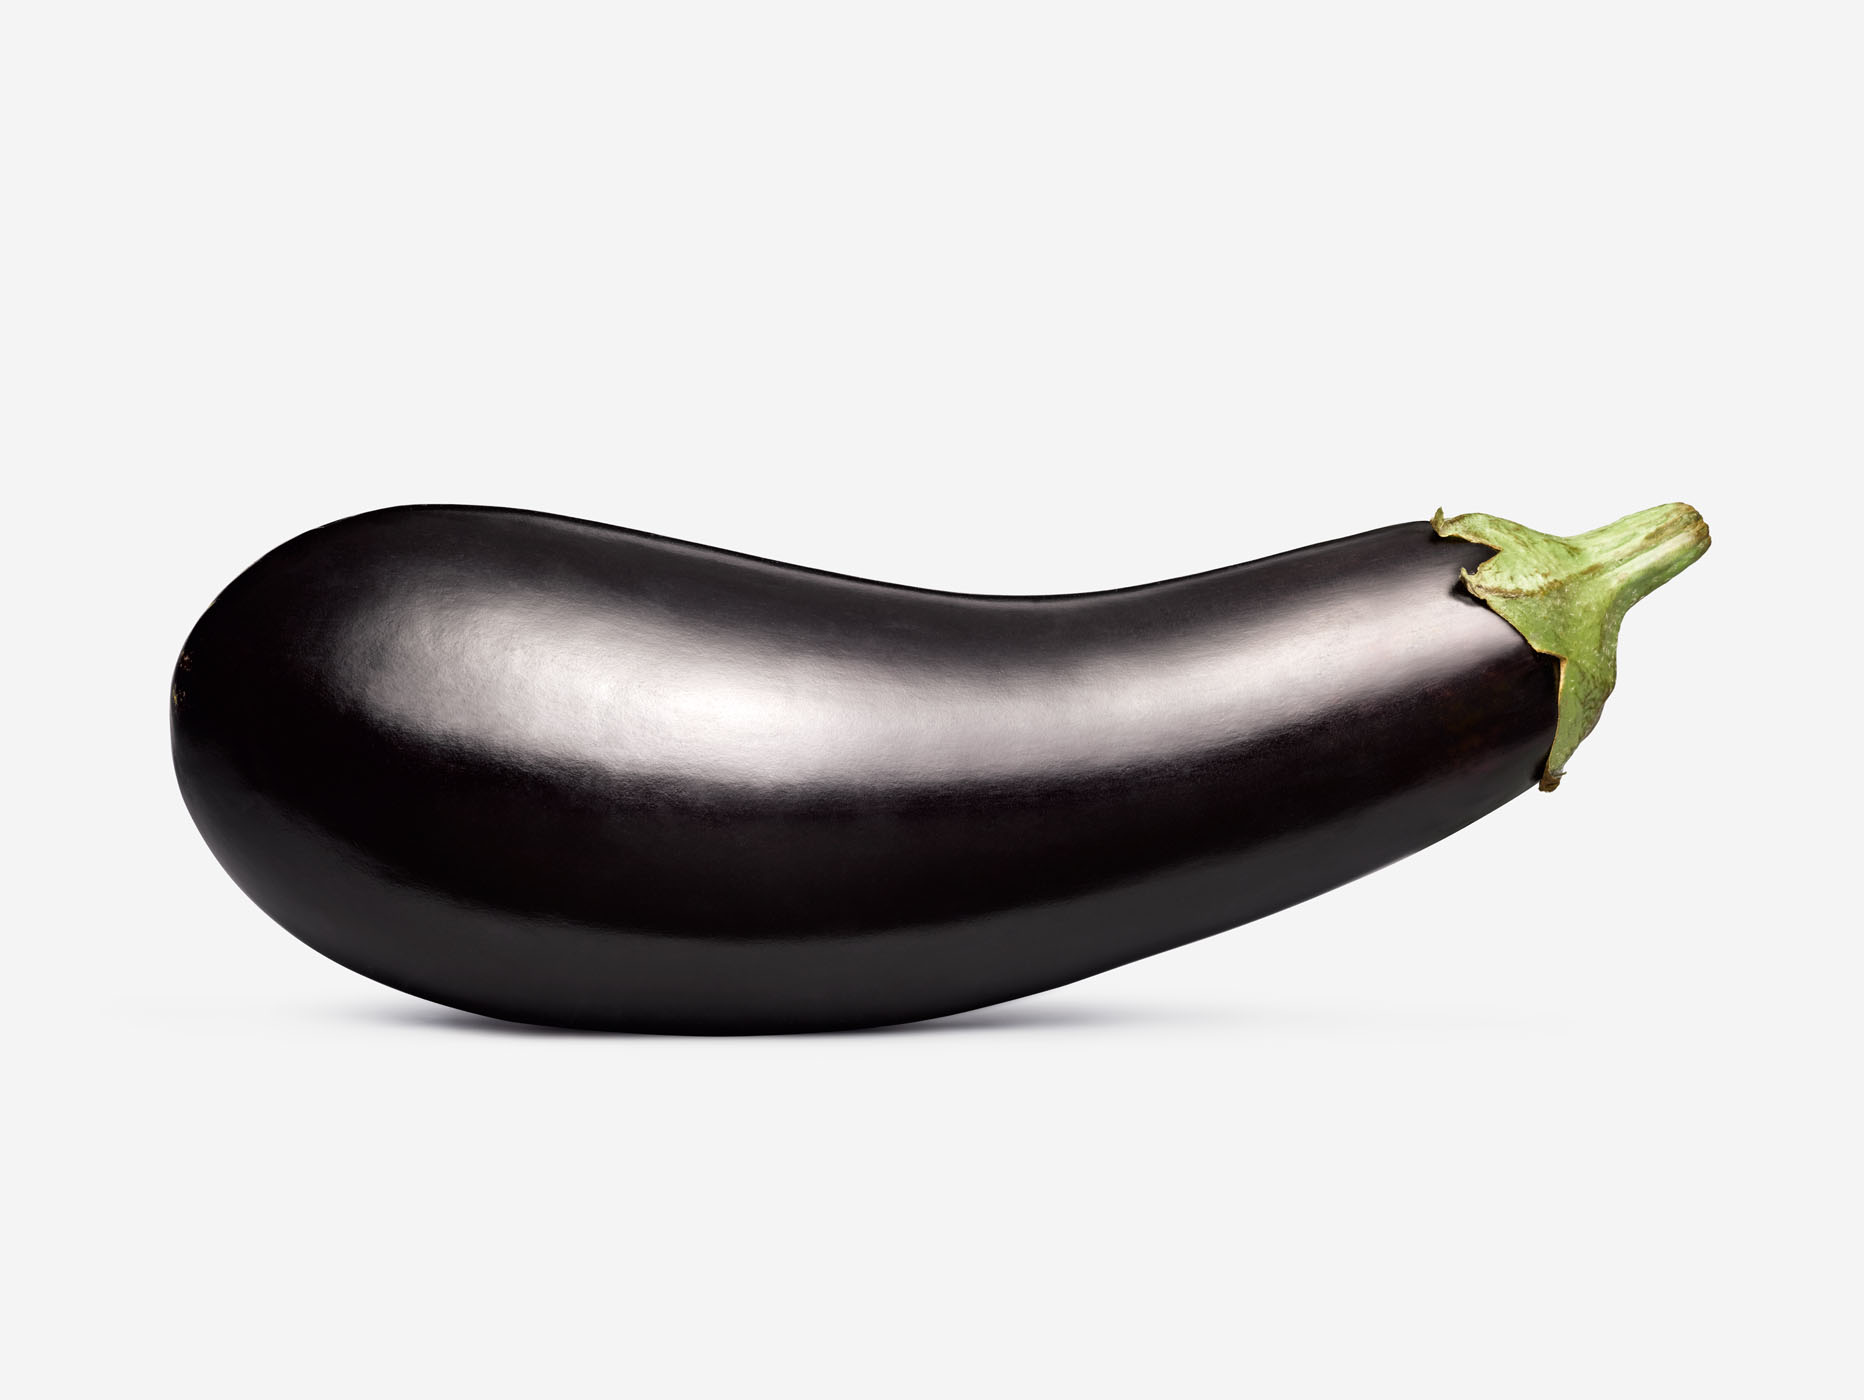 Aubergine by Alexander Kent London based still life and product photographer.